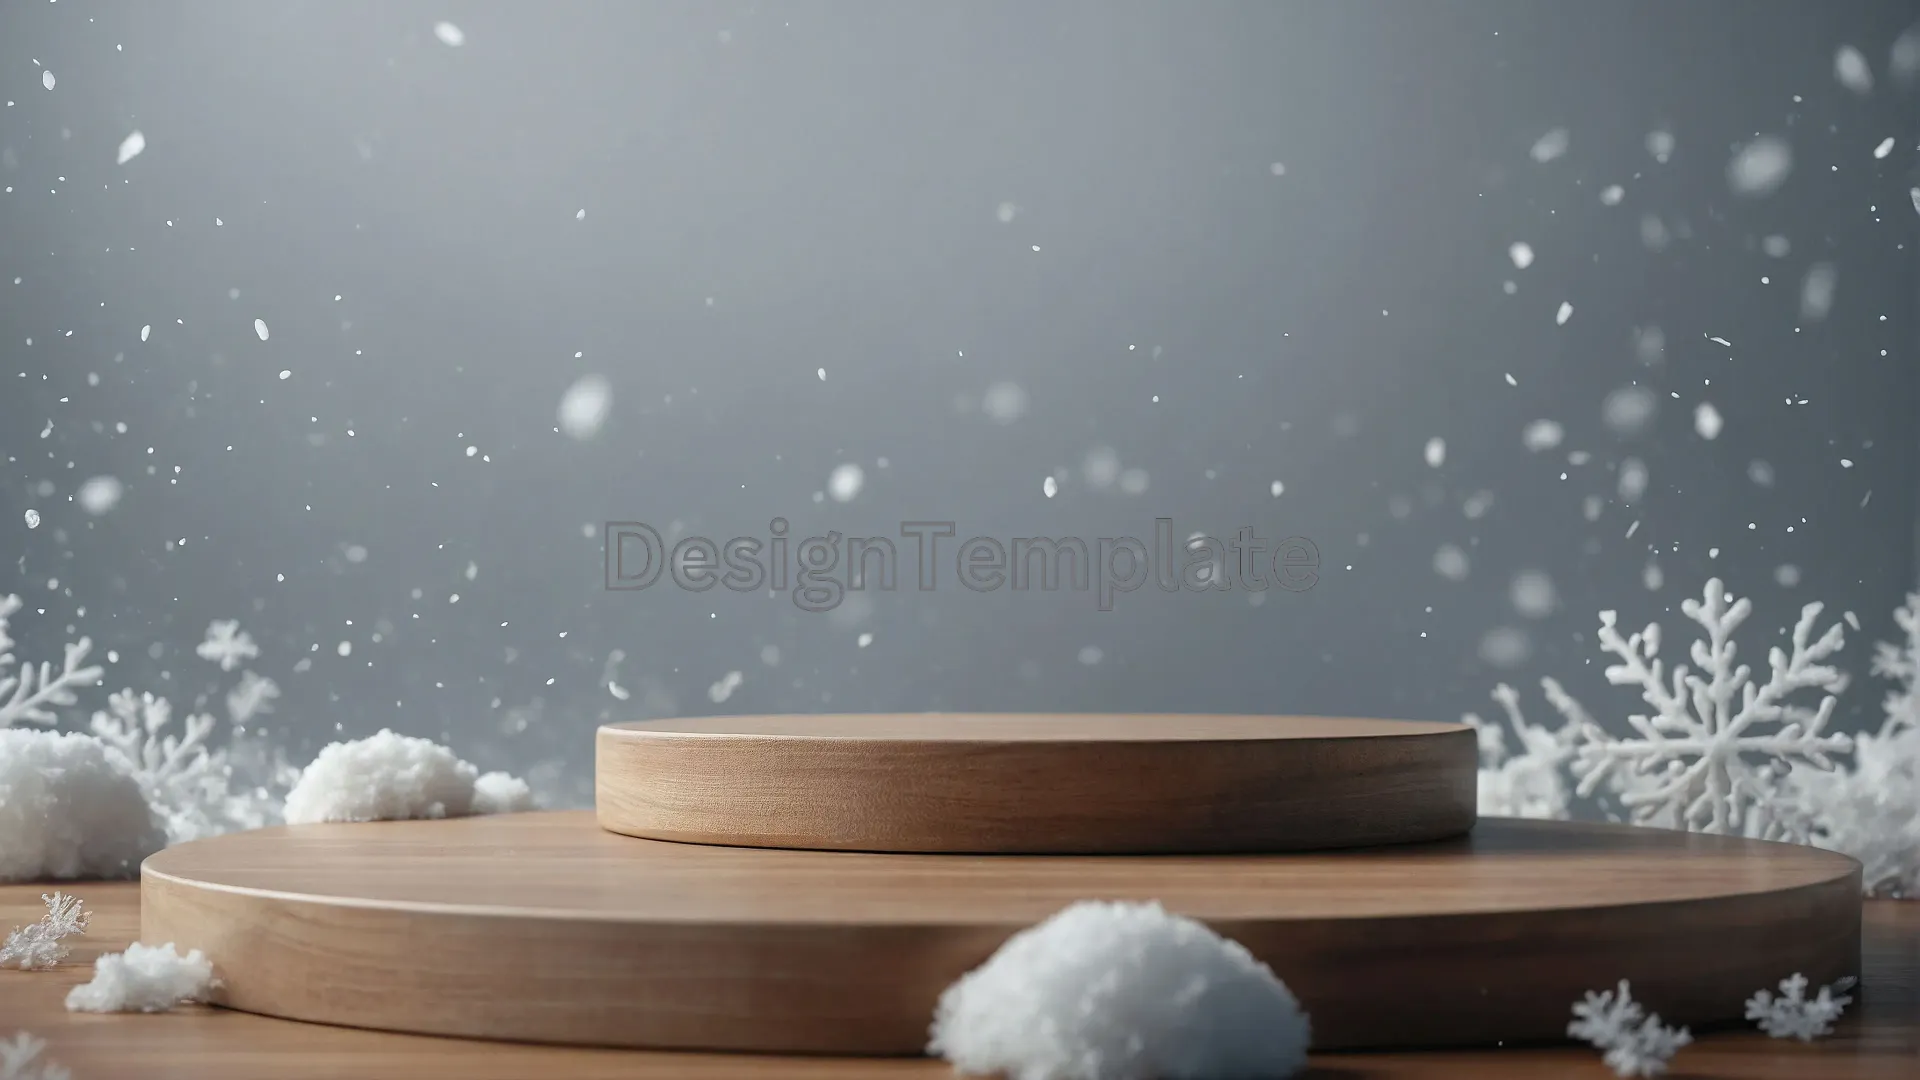 Winter Silence Image Snow-Covered Stones Background